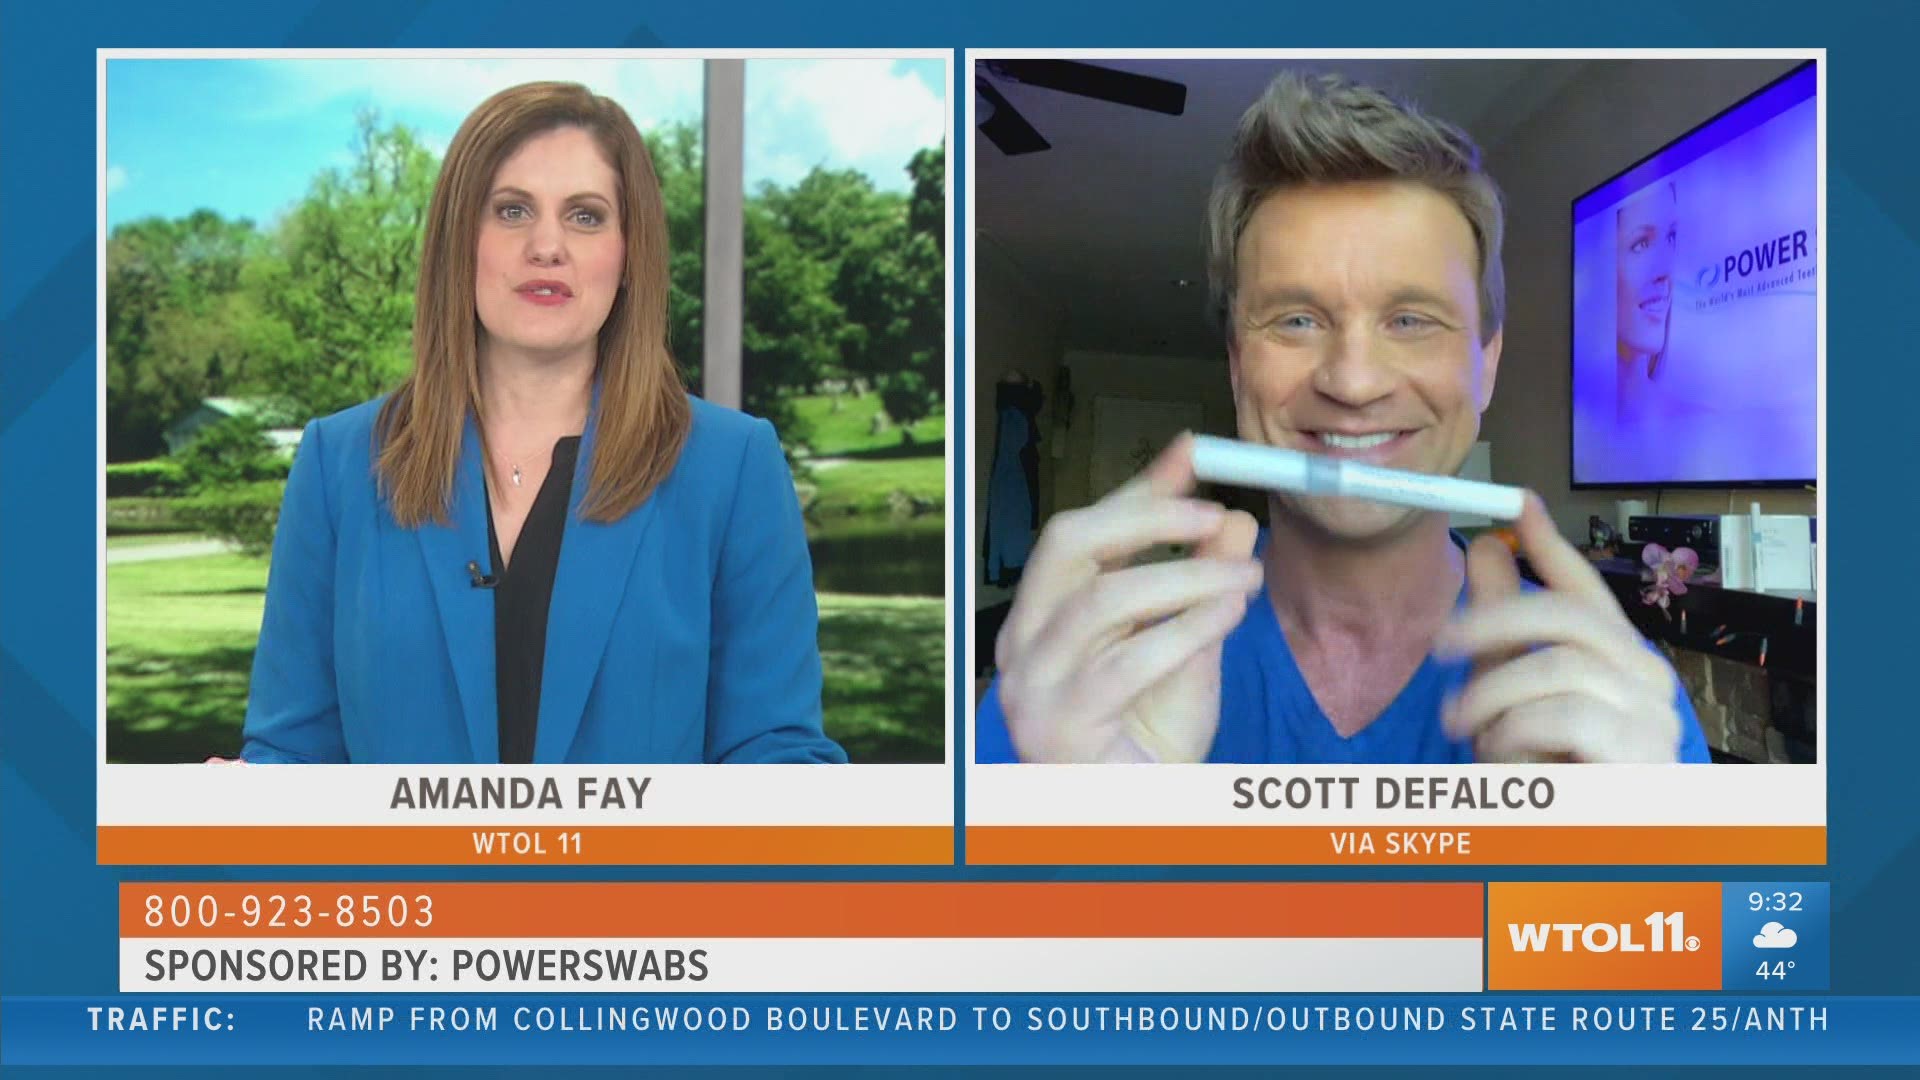 Scott DeFalco joins Your Day to bring you the details on how quick and easy it is to bust tough stains with Power Swabs and get whiter teeth.